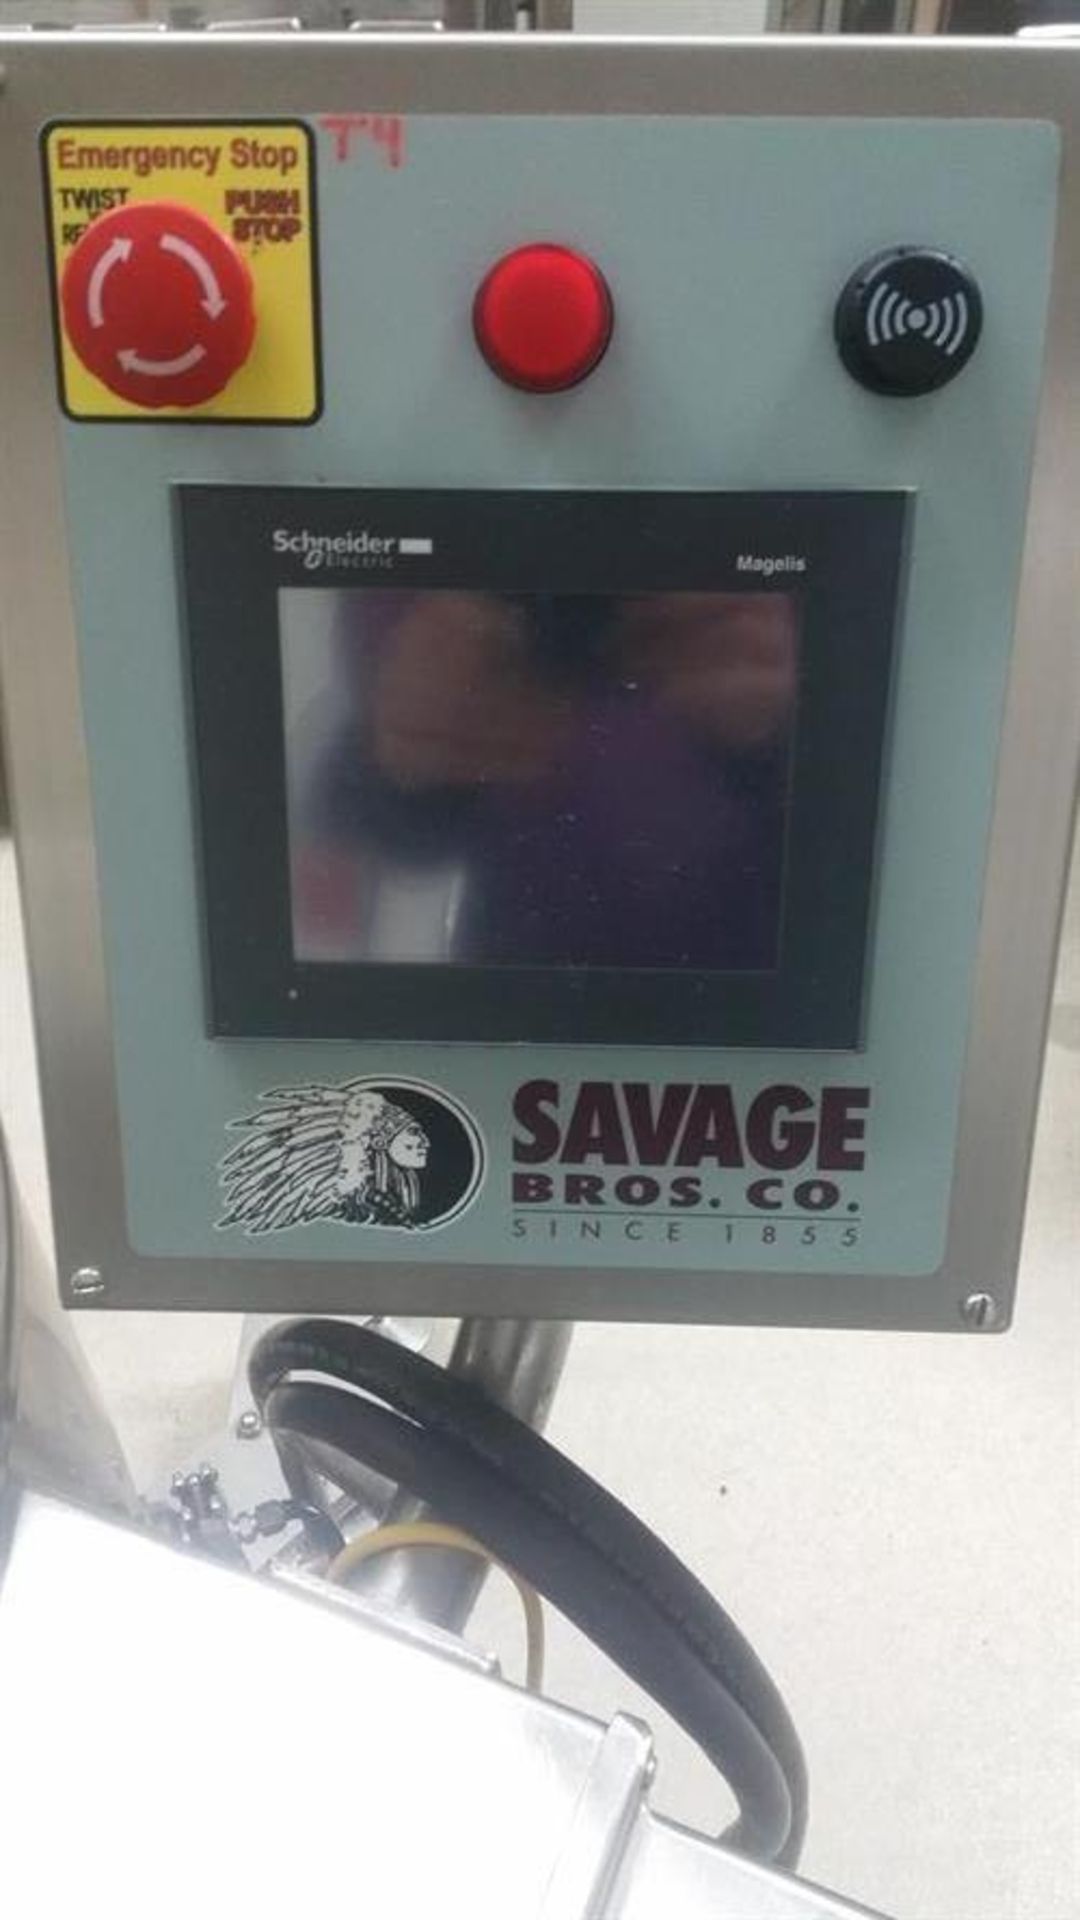 Savage 300-lb Stainless Steel Auto tempering Melter with Metering Pump - All stainless steel - Water - Image 9 of 12